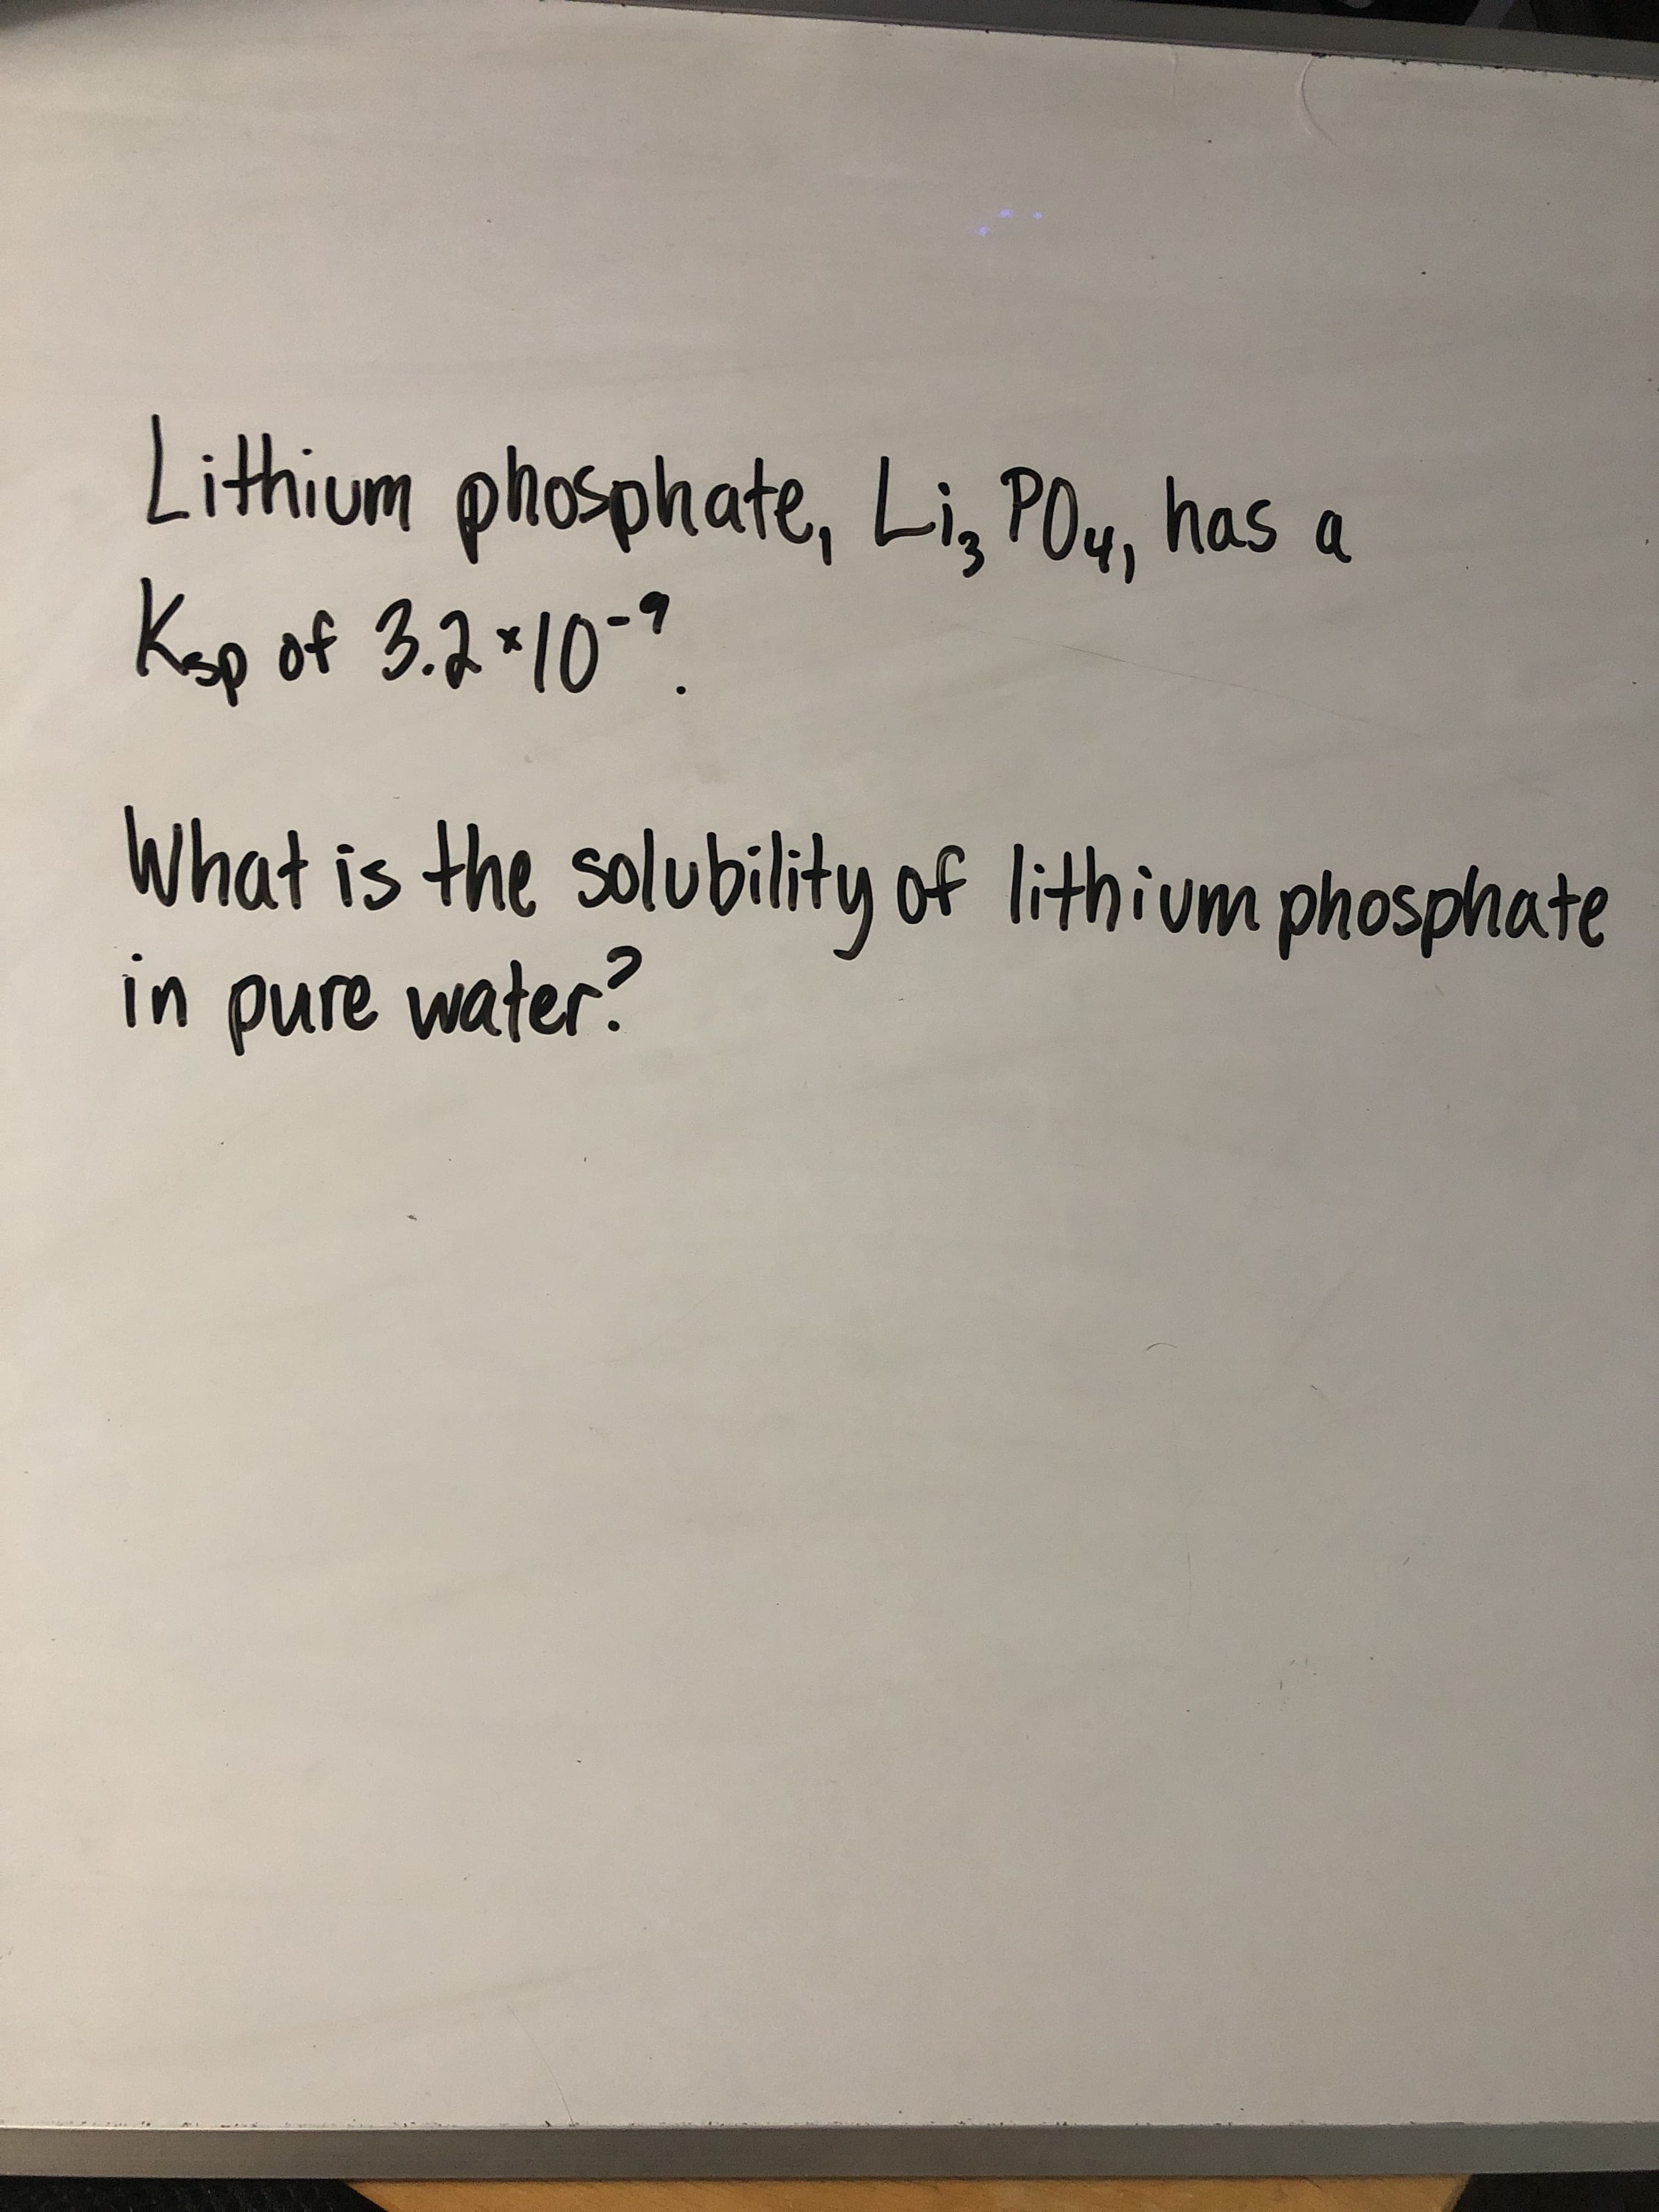 Lithium phosphate, Li, POy, has a
Kap of 3.2*10-9.
What is the solubility of lithium phosphate
in pure water?
